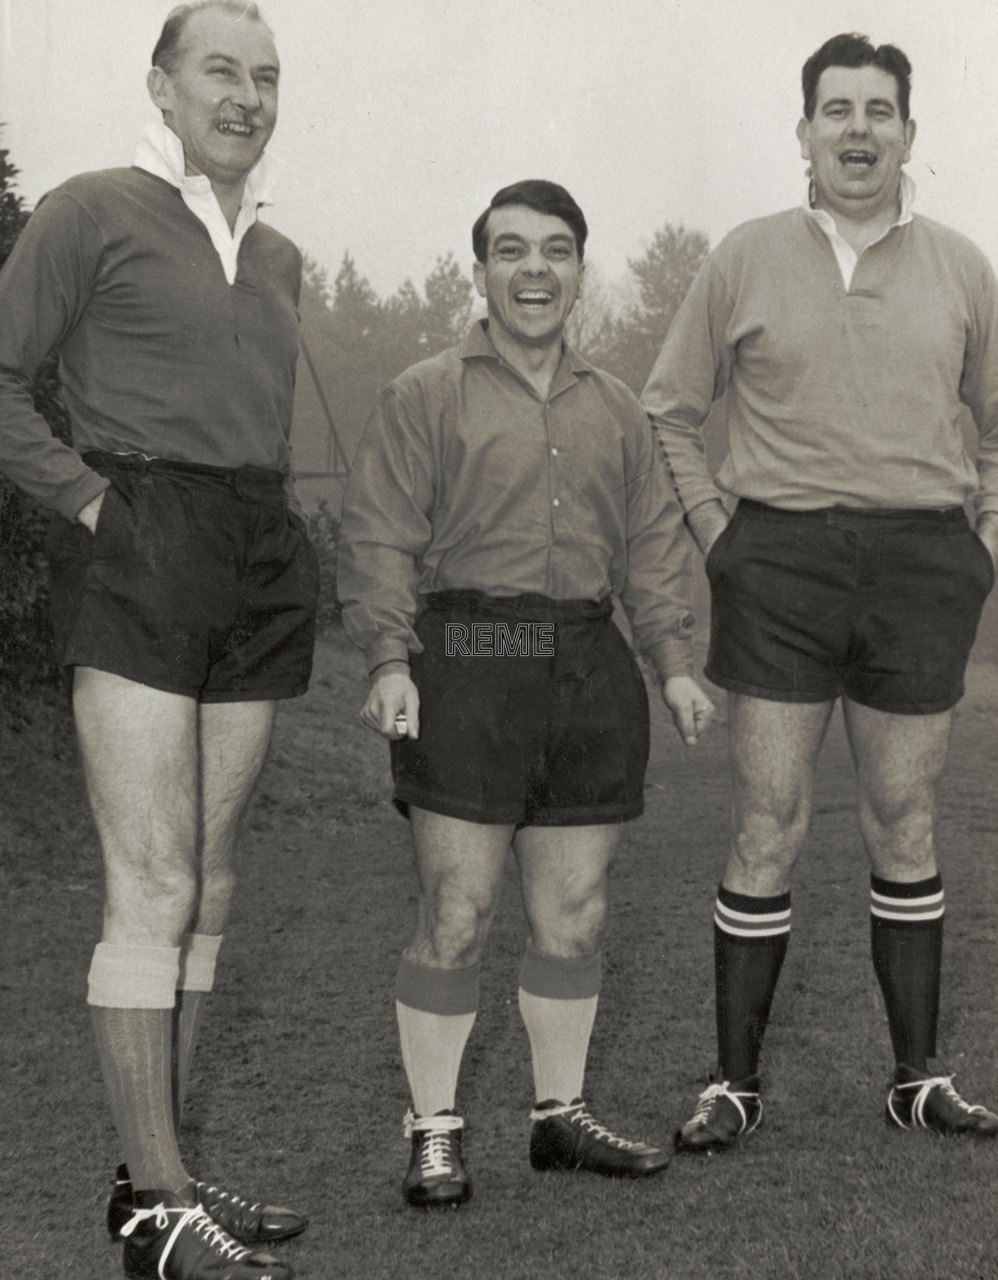 The Corps’ Three Army Class 1 Rugby Referees, 1970